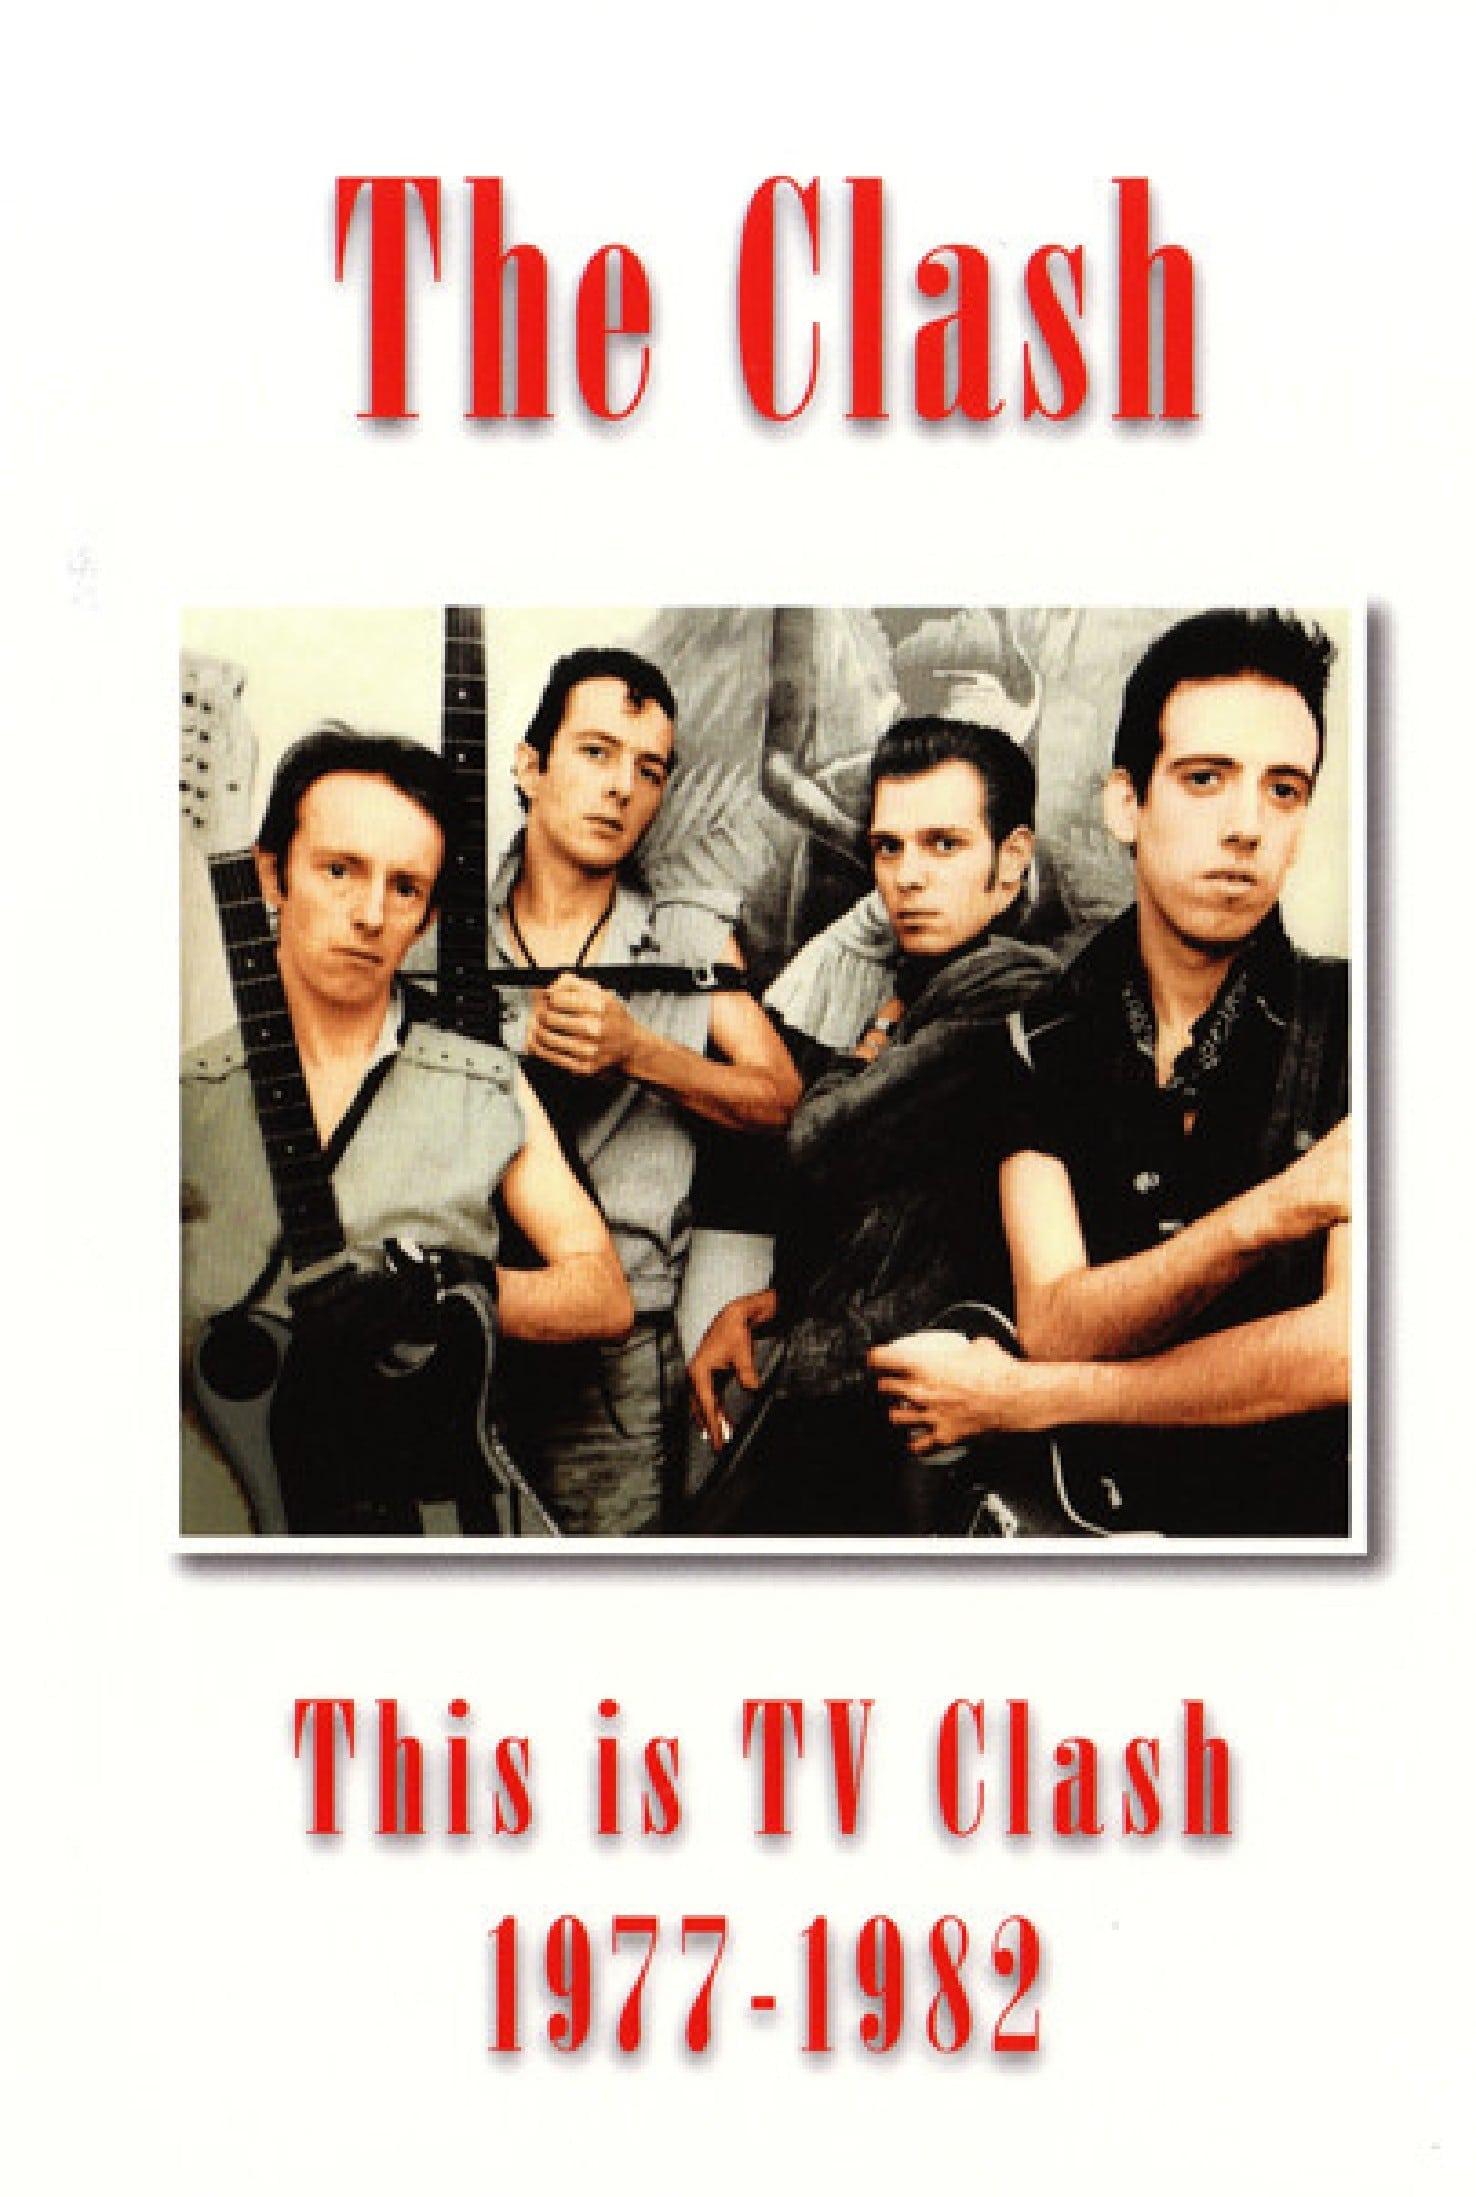 The Clash: This is TV Clash 1977-1982 poster